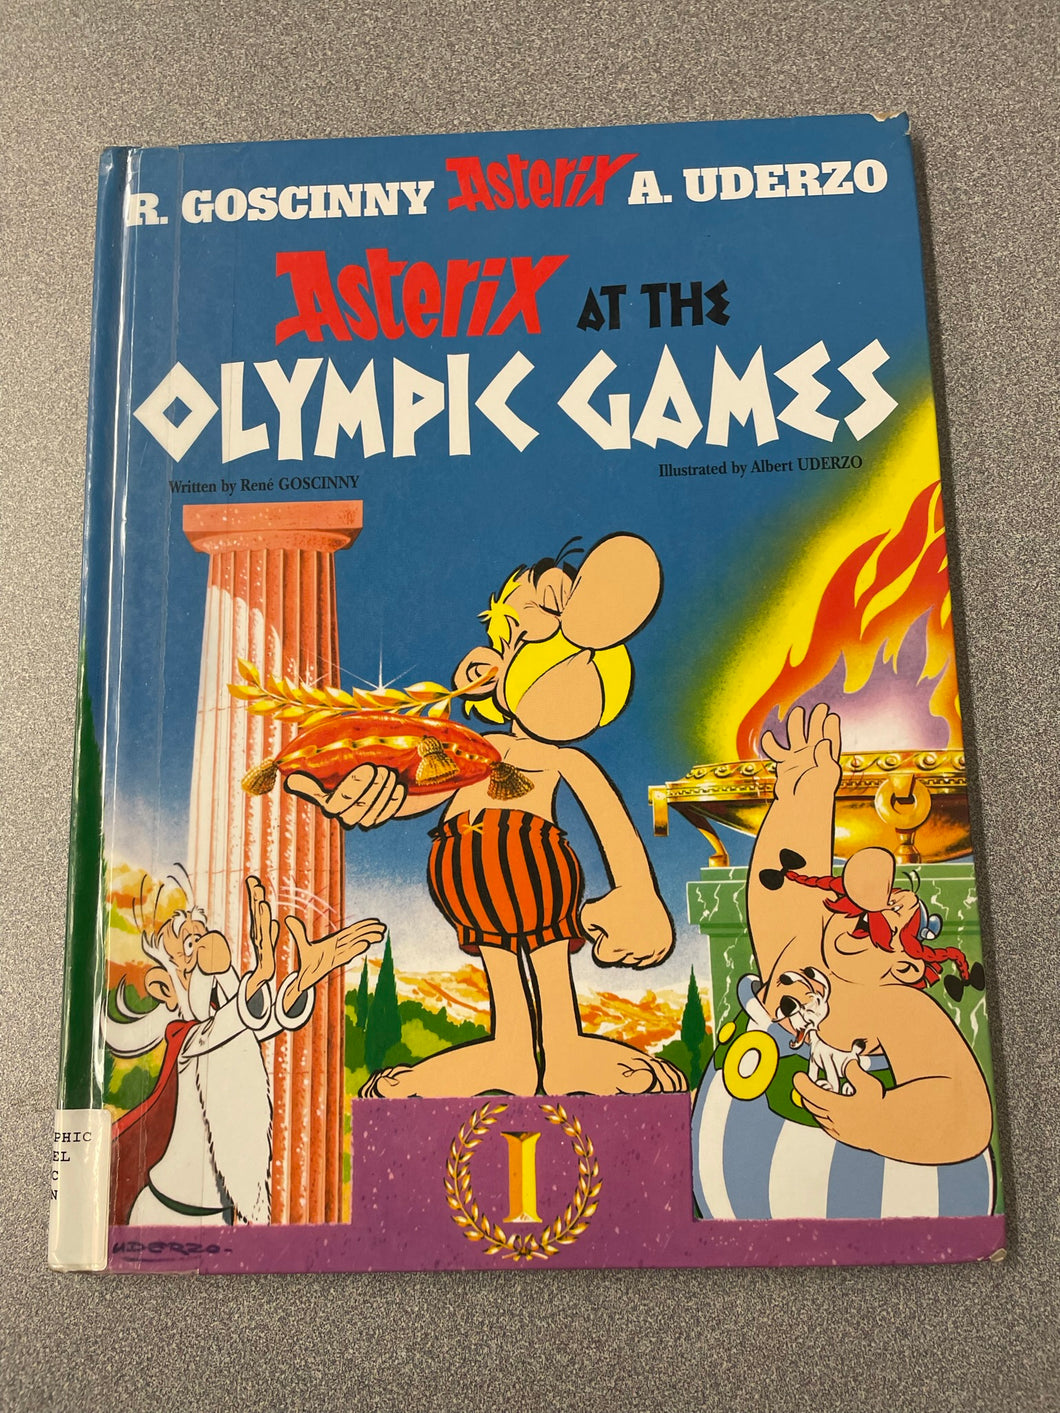 Asterix at the Olympic Games, Rene Goscinny and Albert Uderzo 1968 GN